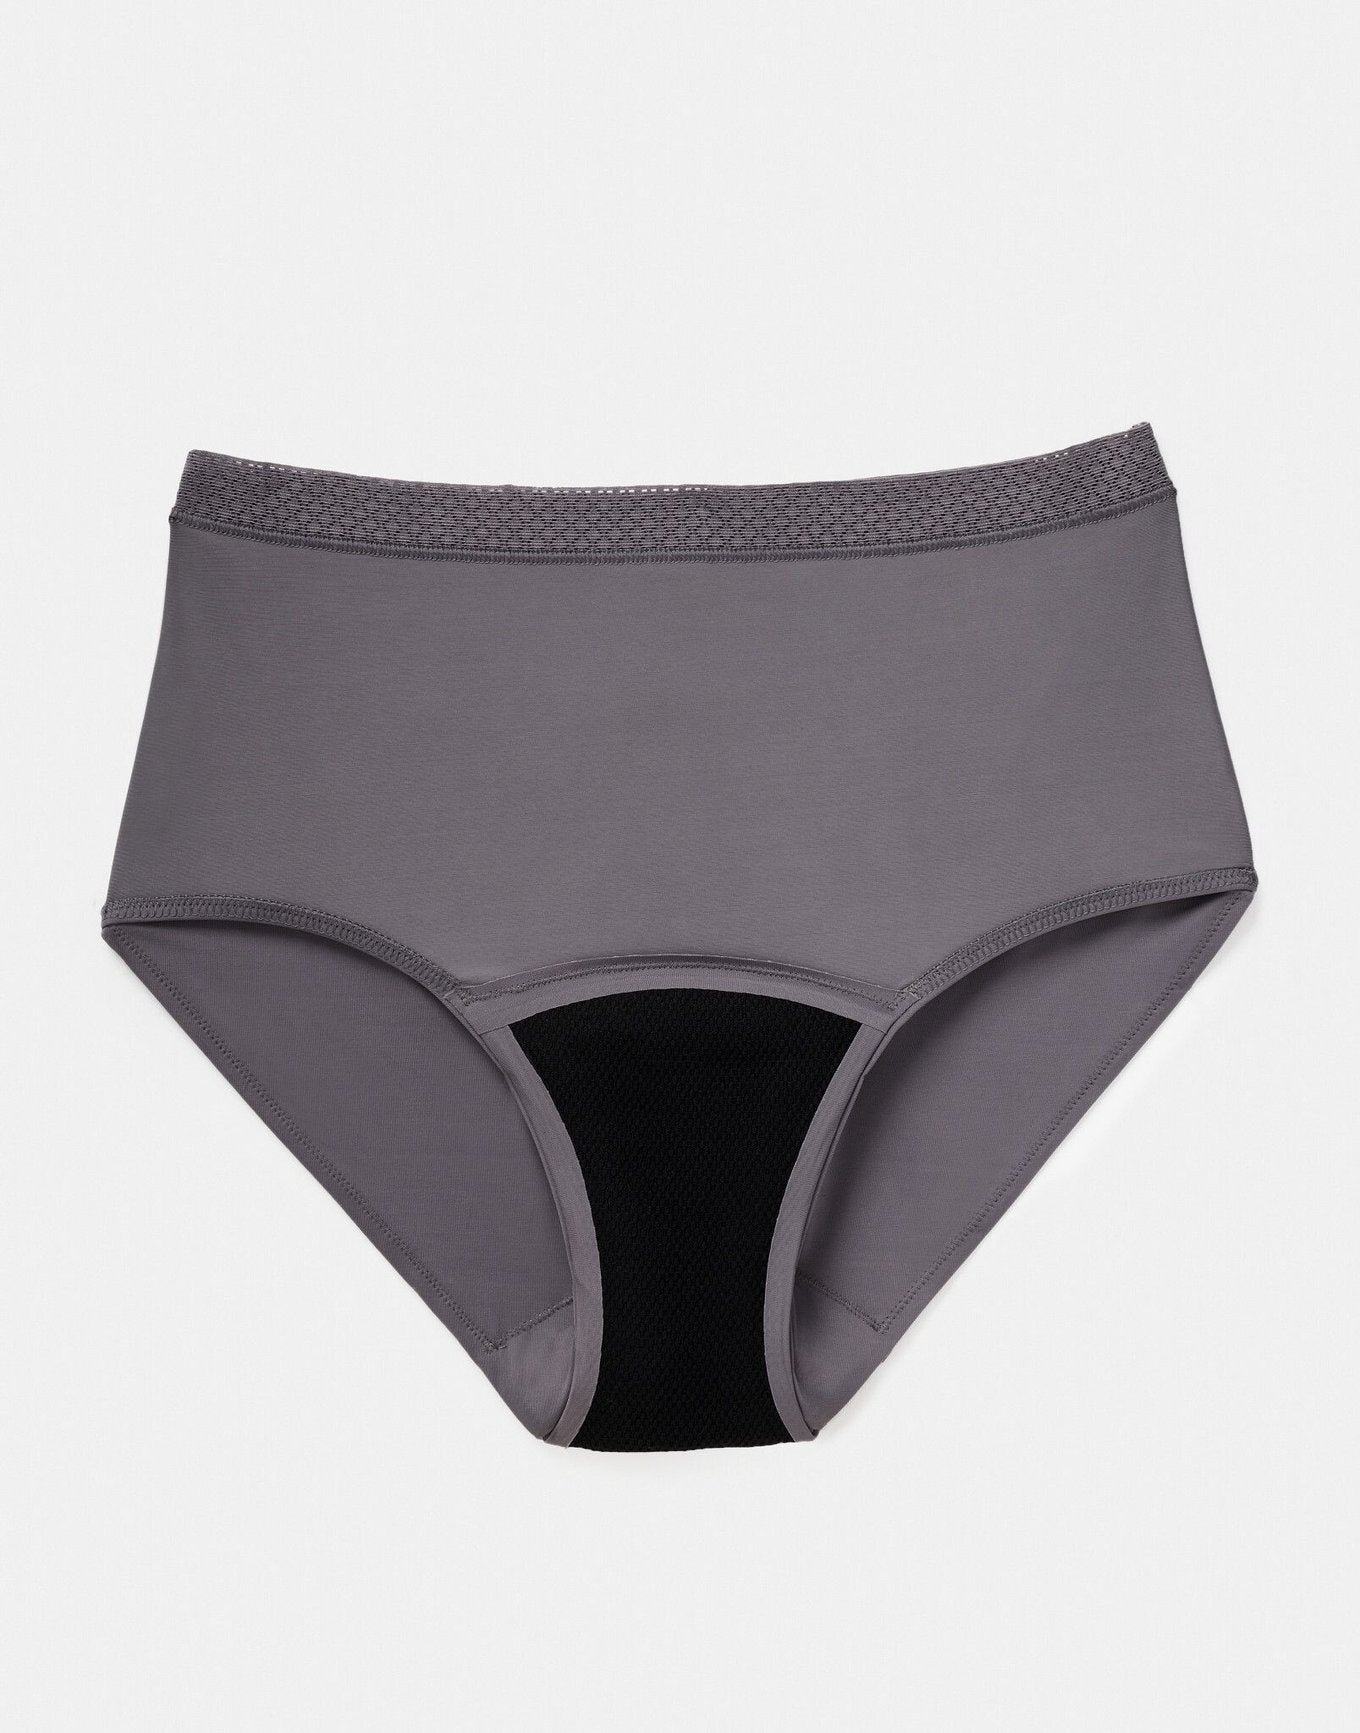 Joyja Jess period-proof panty in color Excalibur and shape high waisted